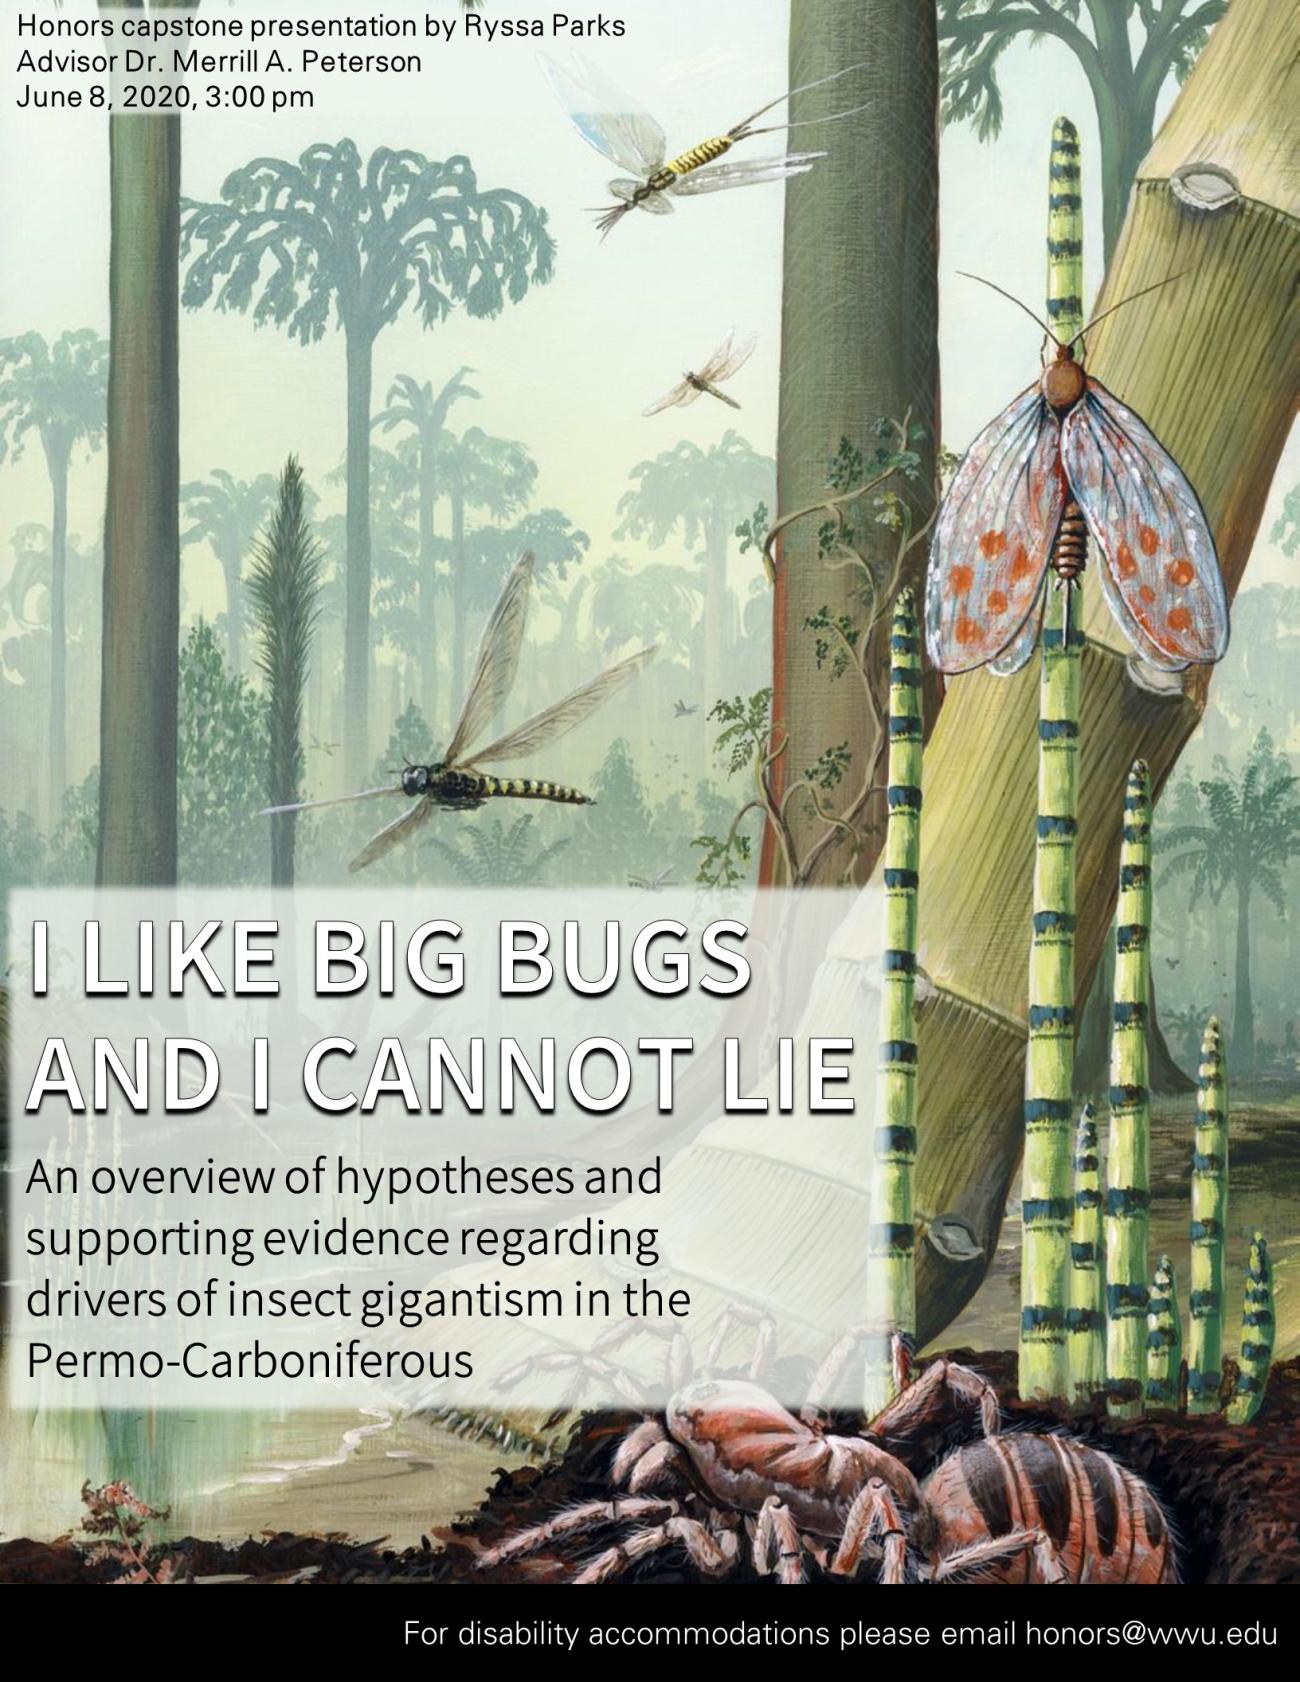 Image: Illustration of giant insects in a prehistoric-looking forest, by Richard Binzley. Text reads "I like big bugs and I cannot lie: An overview of hypotheses and supporting evidence regarding drivers of insect gigantism in the Permo-Carboniferous."  "Honors Capstone Presentation by Ryssa Parks, Advisor Dr. Merrill A. Peterson"  "June 8, 2020, 3:00pm"  "For disability accommodations please email honors@wwu.edu"